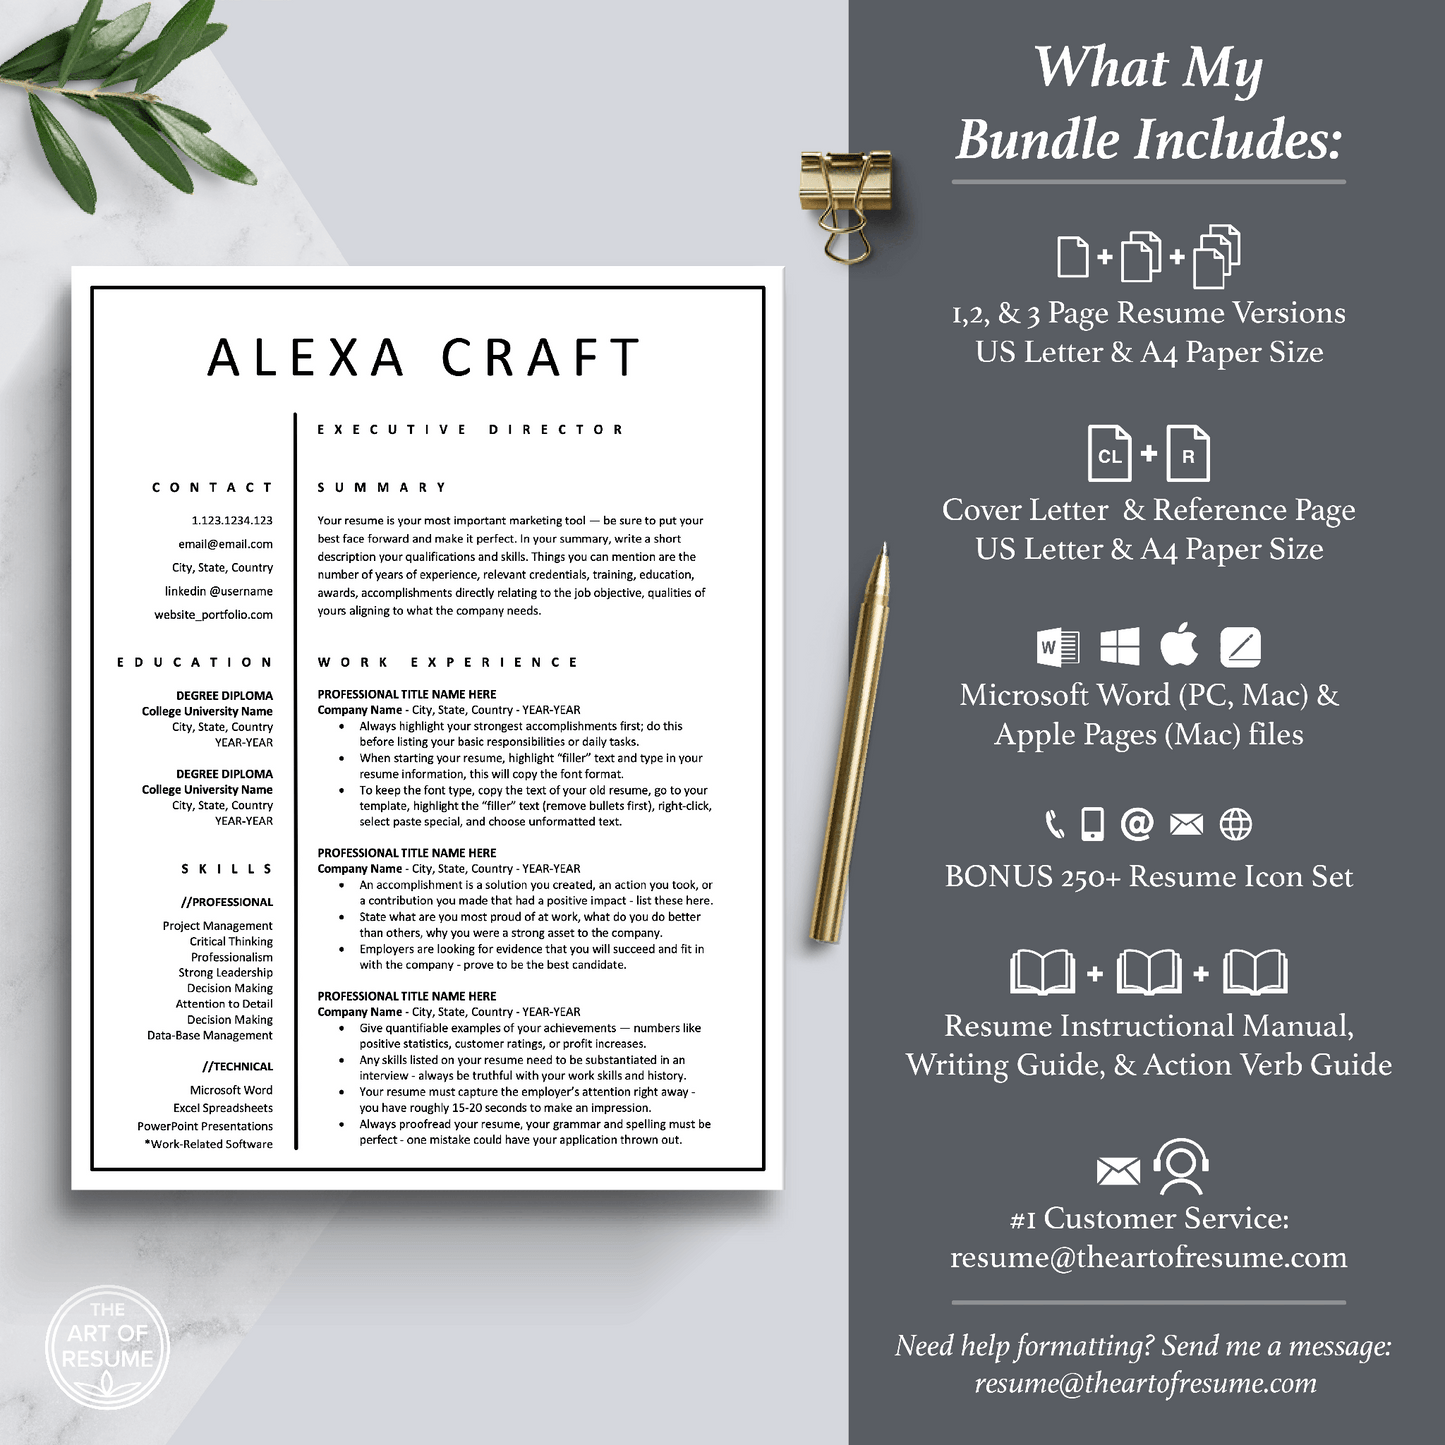 Professional Resume Bundle includes 3 Resume Designs, Cover Letter, Reference Page, Mac, PC, A4 Paper, US Letter size, The Art of Resume Writing Guide, Resume Instructional Manual, Action Verb Guides, Best Customer Service, Free 250 Resume Icons